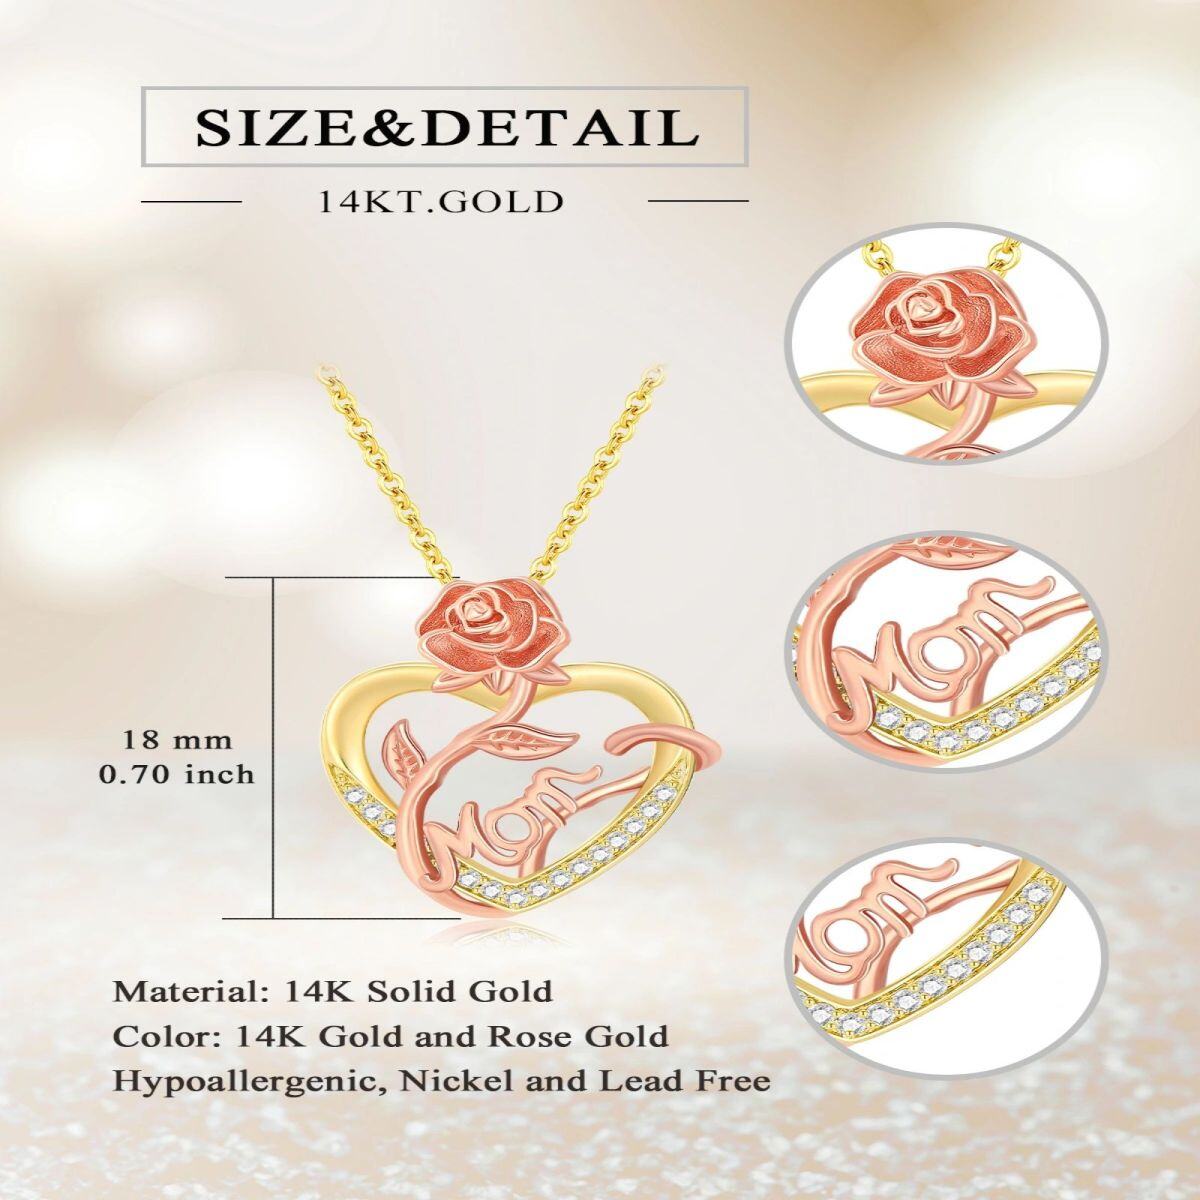 14K Gold & Rose Gold Circular Shaped Cubic Zirconia Rose & Heart Pendant Necklace with Engraved Word-4